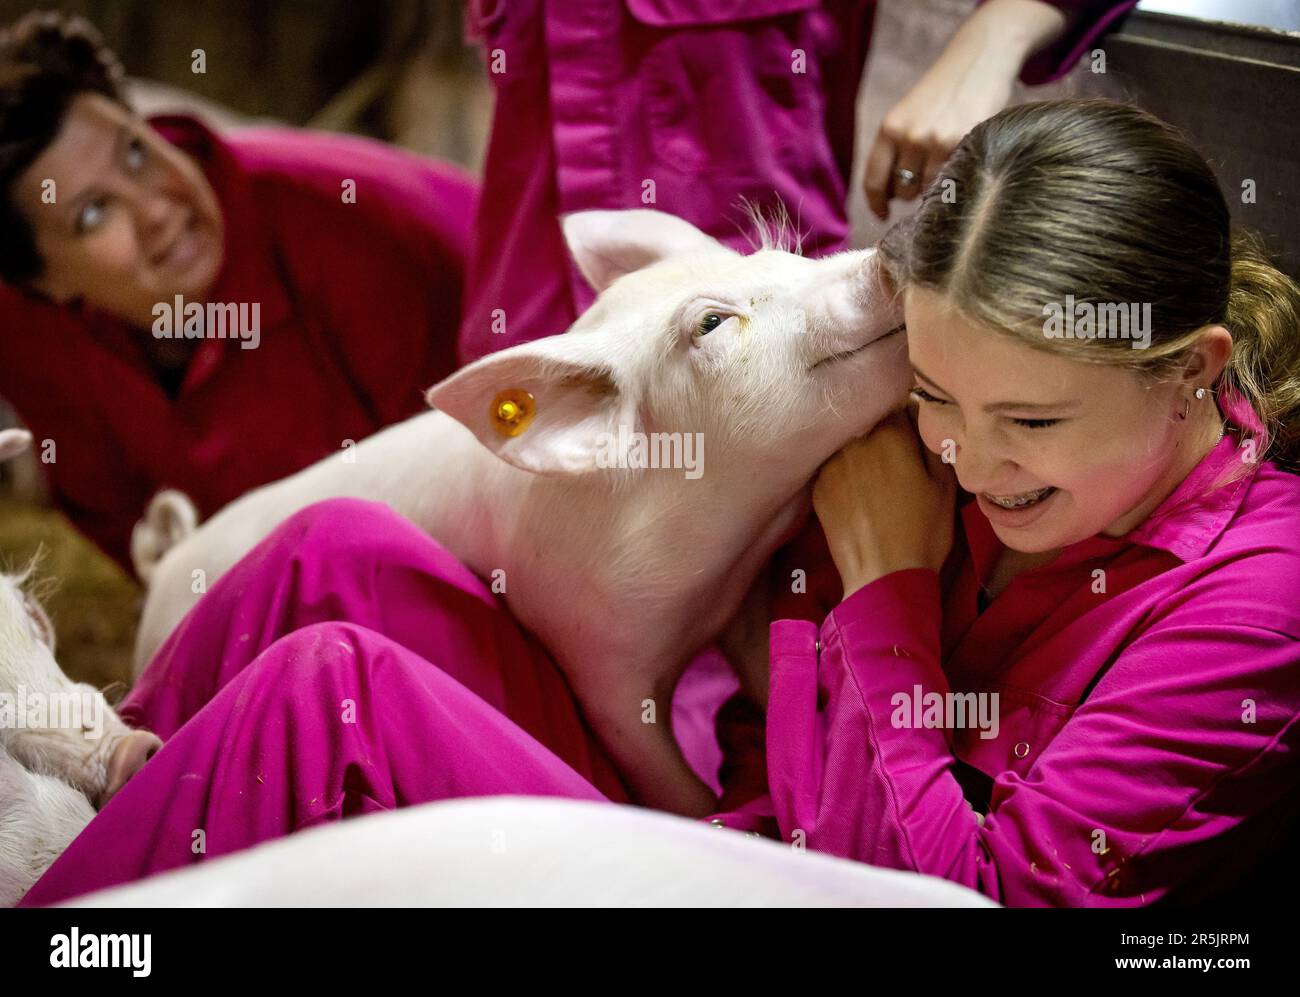 HOOGELOON - A girl cuddles with a piglet in the stable of organic company  De Beukentuin. Visitors can visit the farm to see and pet pigs up close.  ANP KOEN VAN WEEL